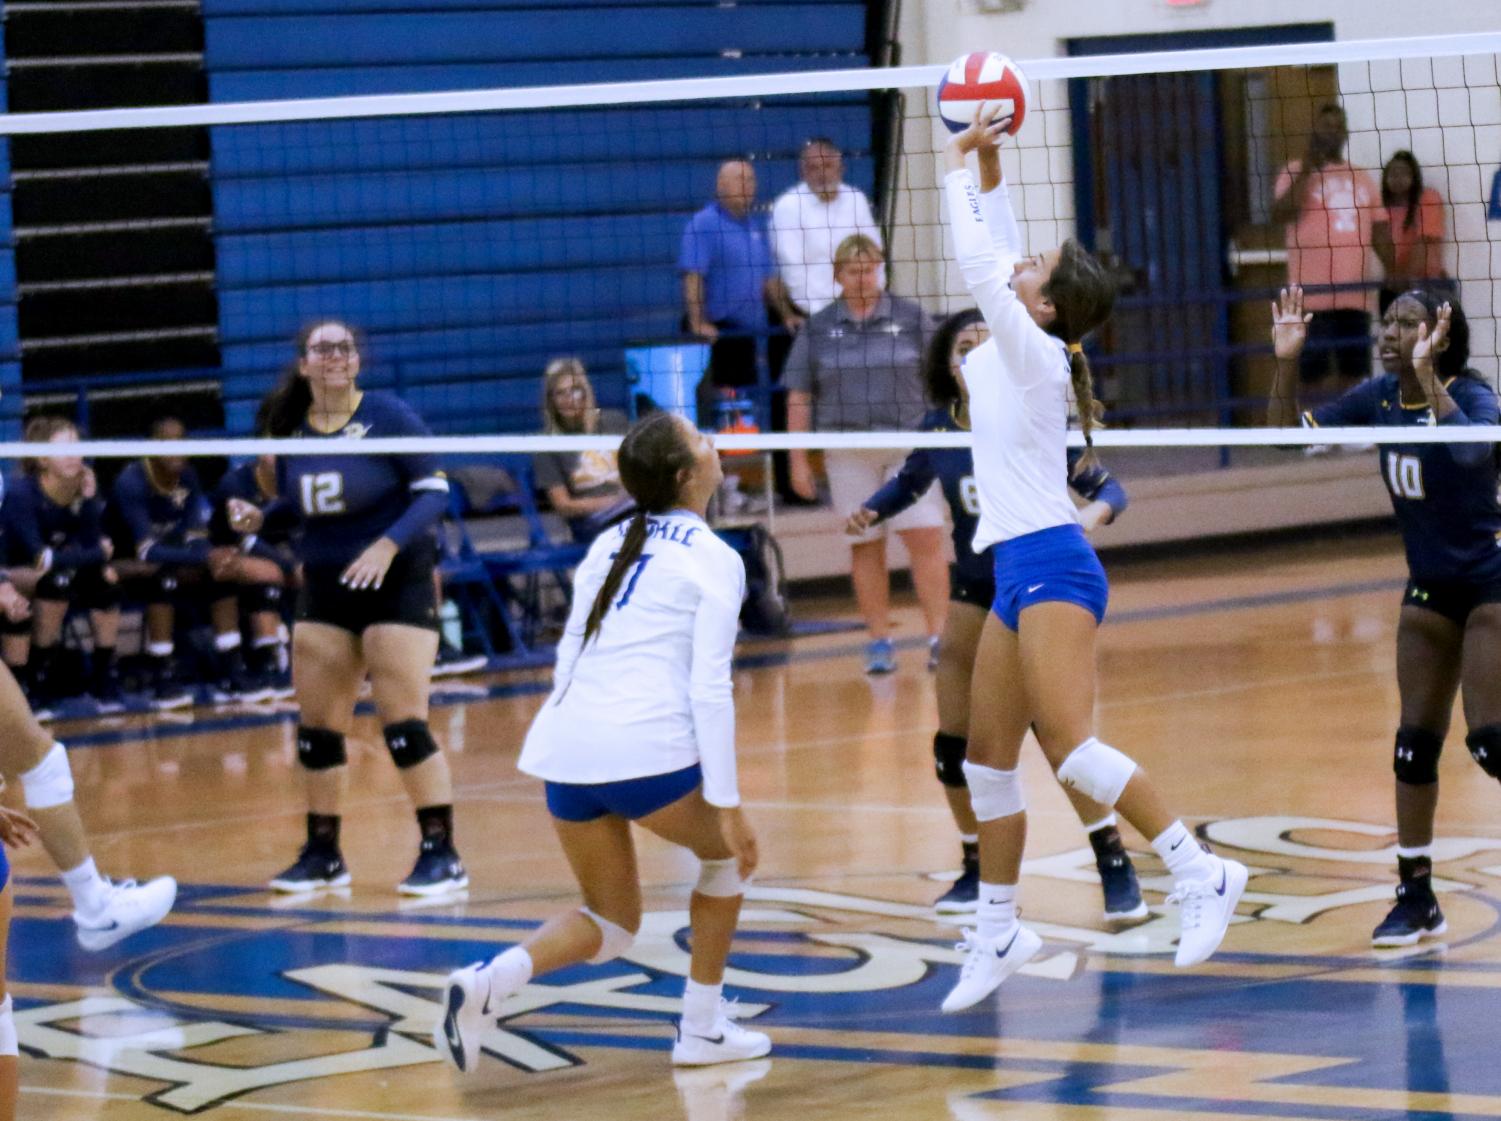 Junior Harleigh Thurman sets the ball as fellow junior London Reue prepares to spike it down. The varsity team beat Pine Tree in straight sets with scores of 25-23, 25-14, and 25-14.                                                                                                                                                                                                                                                                    